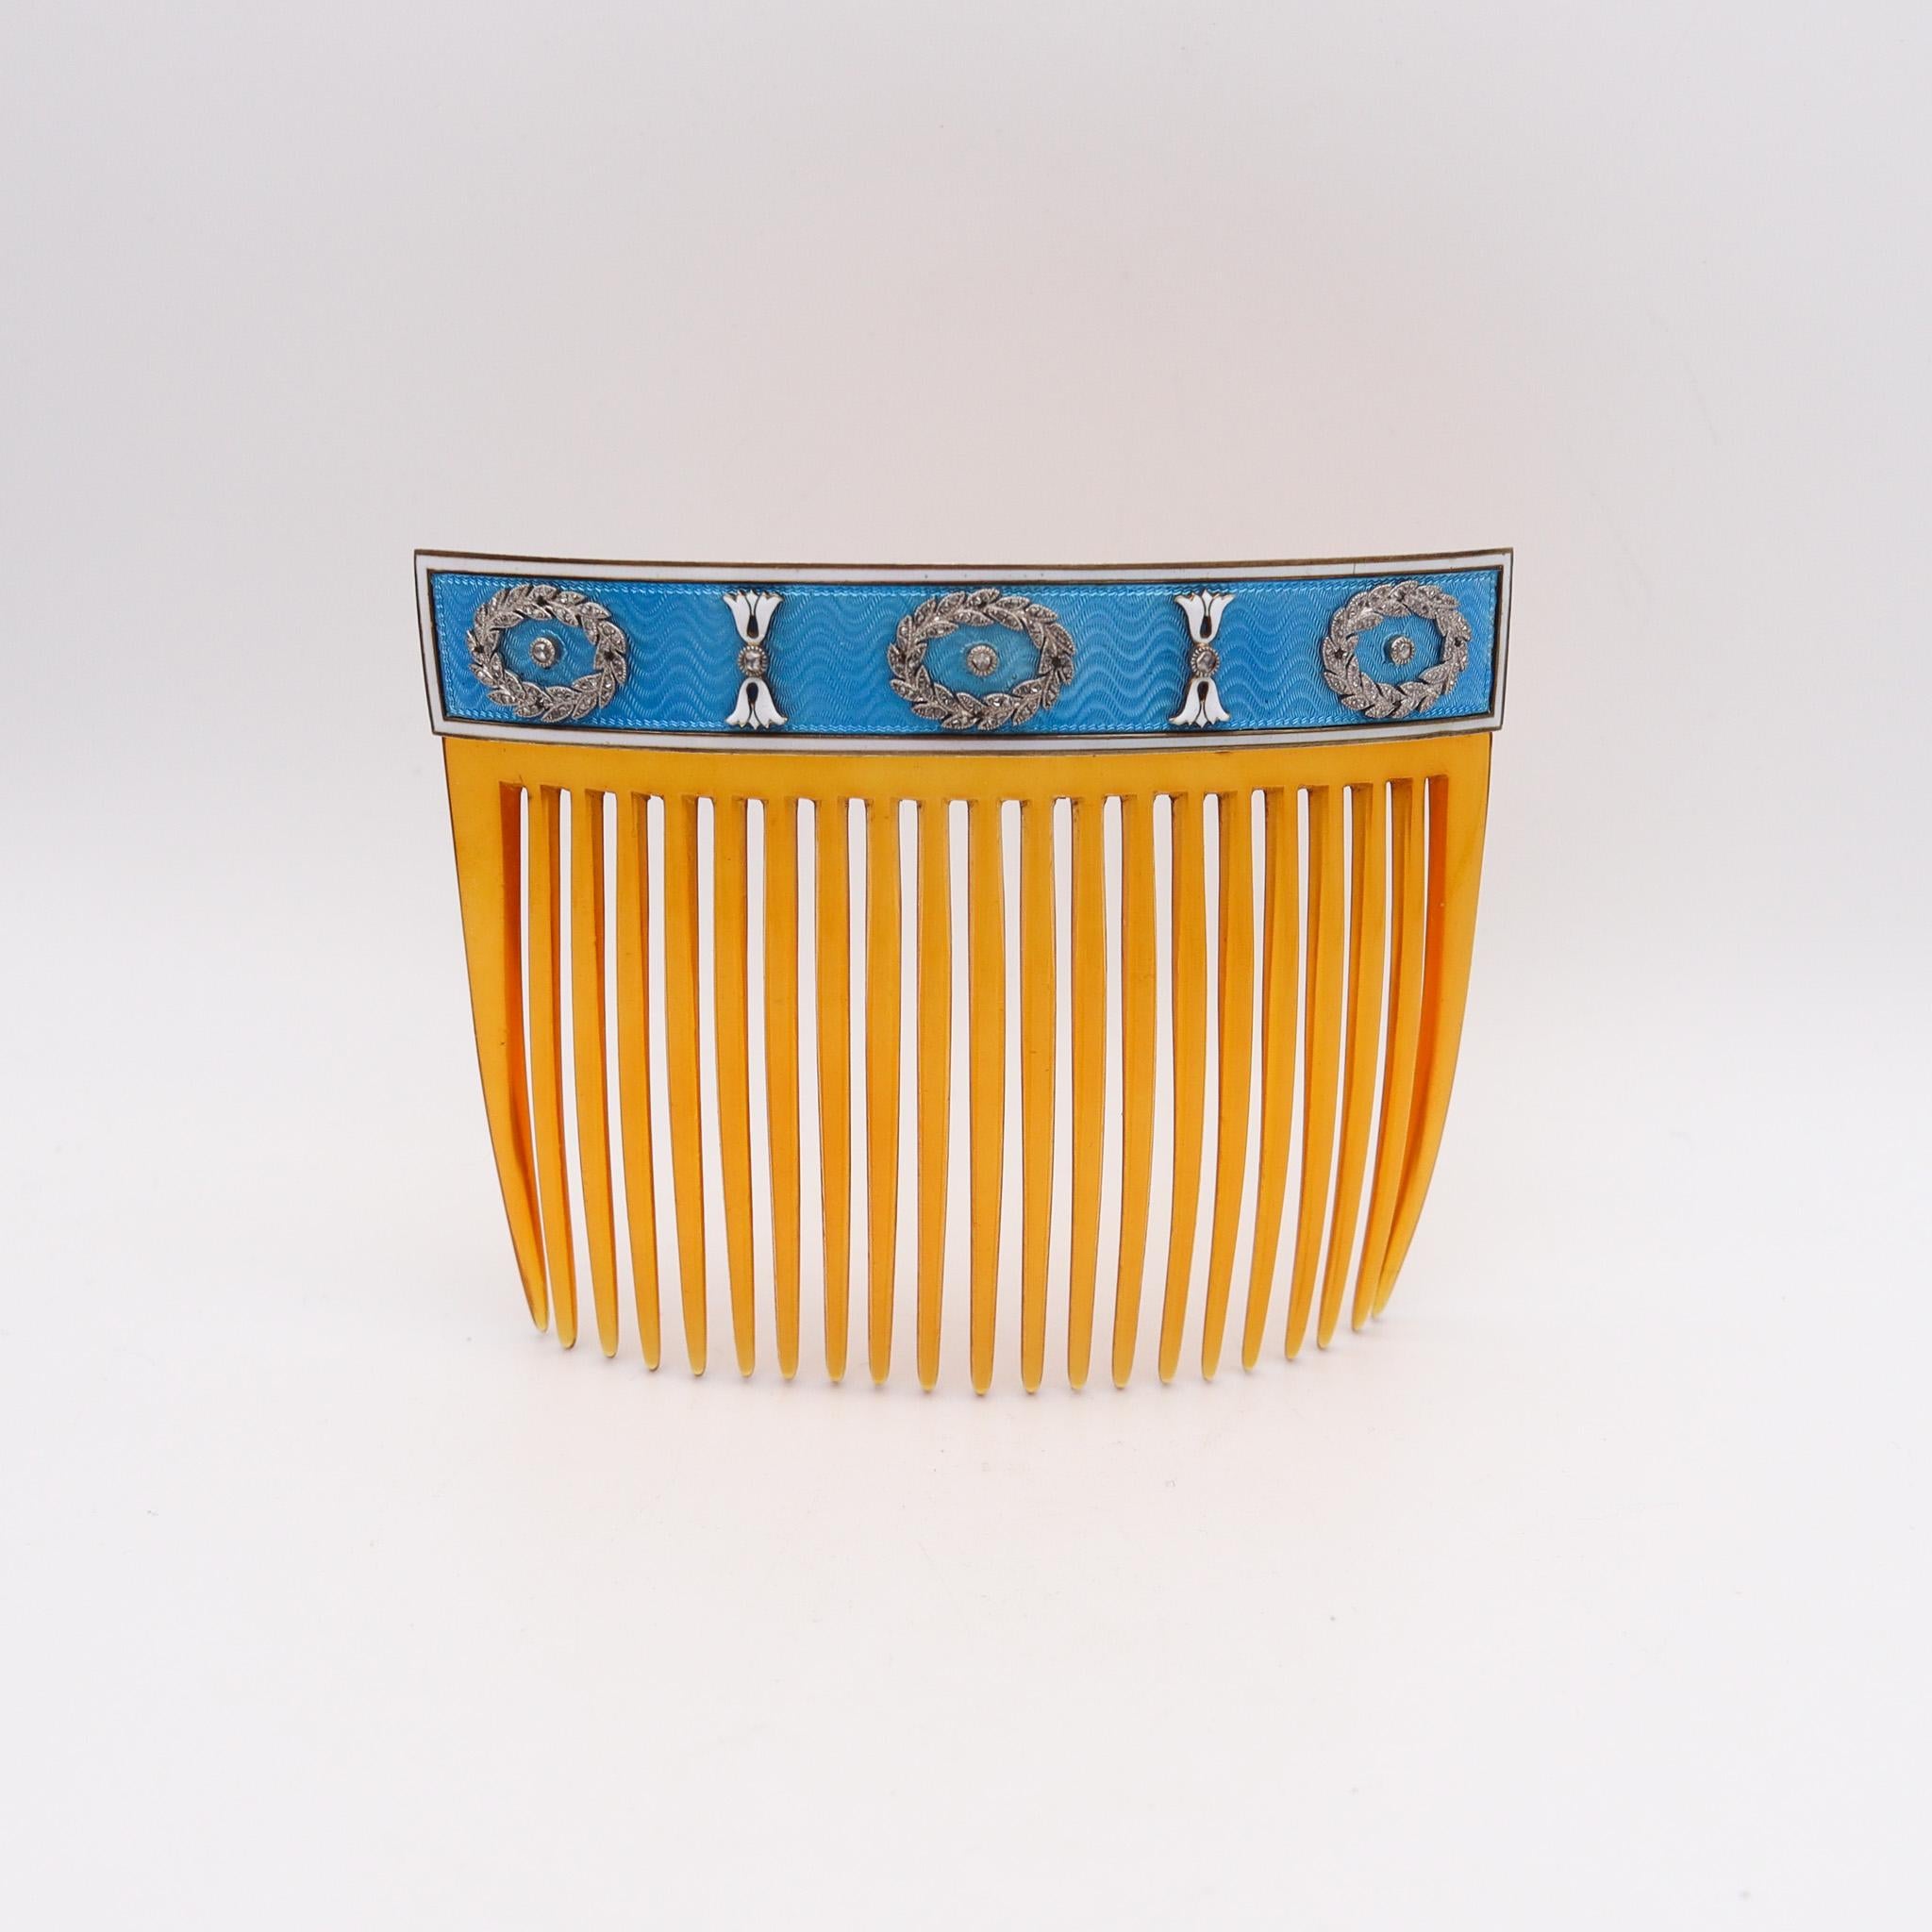 Women's or Men's Cartier Paris 1900 Edwardian Enameled Hairs-Comb in 18Kt Gold With Diamonds For Sale